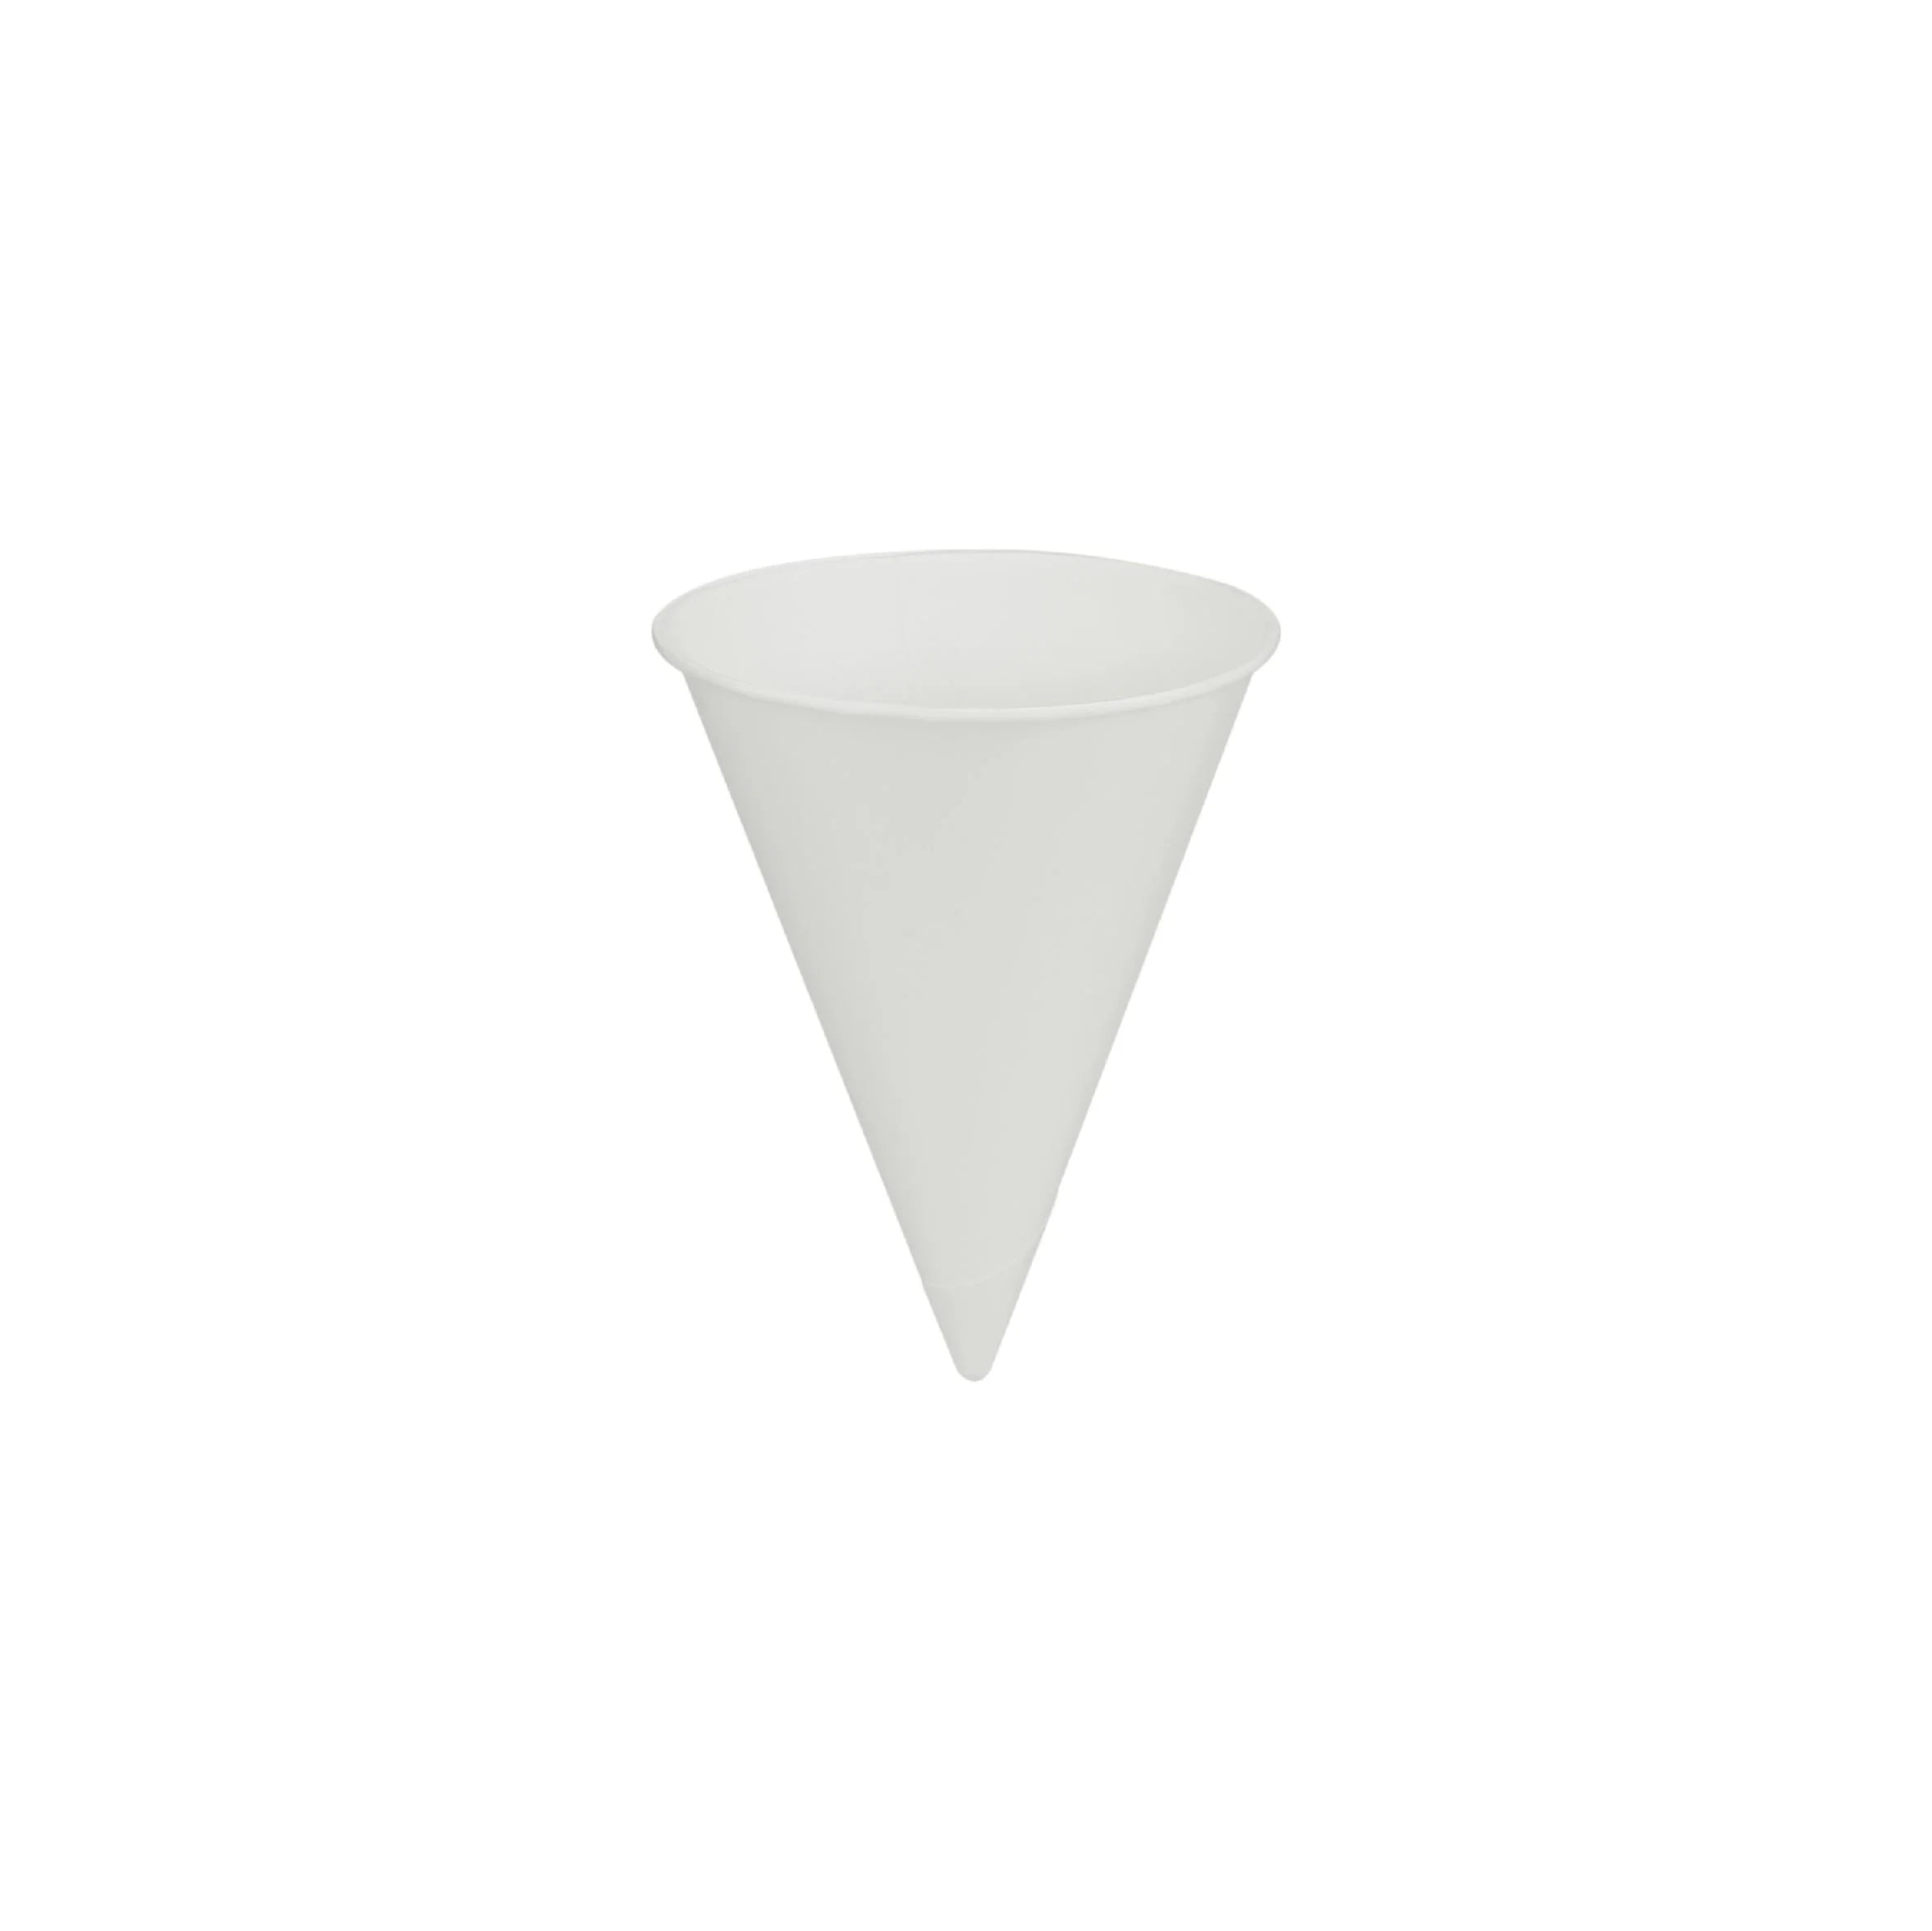 5000 Pieces White Paper Food Service Cone Cold Water Cup 4.5 Oz